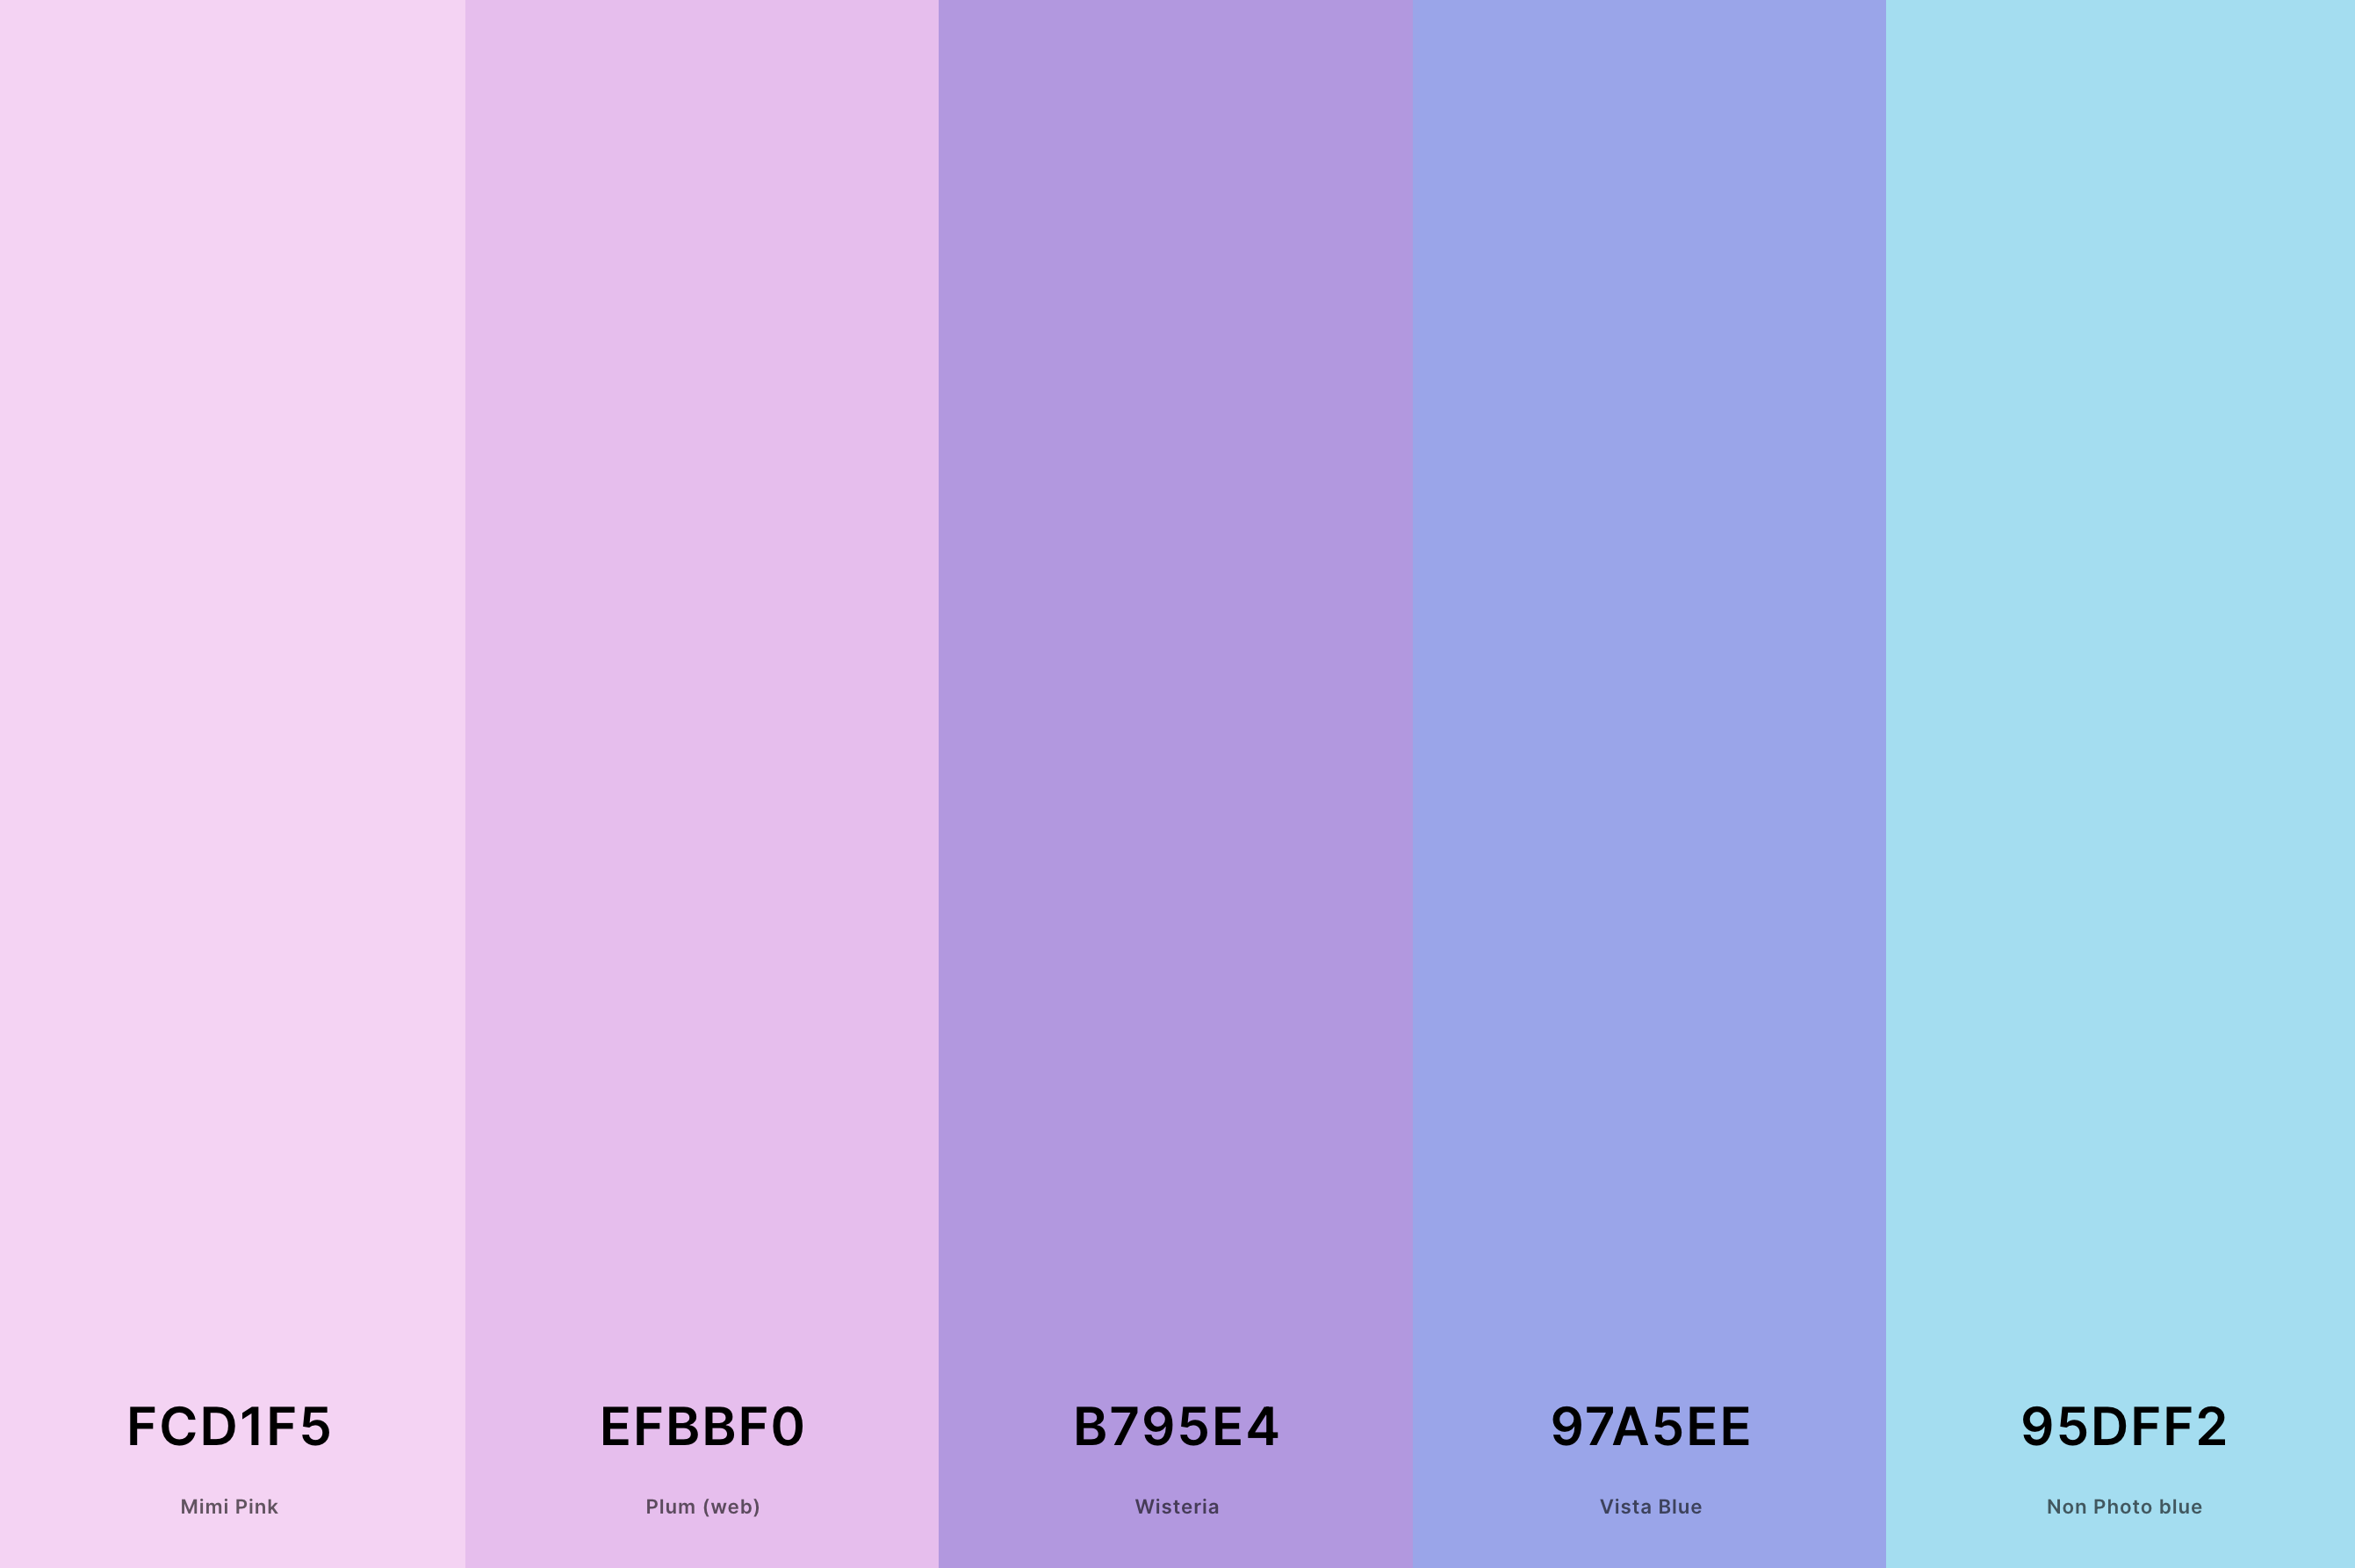 25. Pastel Pink And Blue Color Palette Color Palette with Mimi Pink (Hex #FCD1F5) + Plum (Web) (Hex #EFBBF0) + Wisteria (Hex #B795E4) + Vista Blue (Hex #97A5EE) + Non Photo Blue (Hex #95DFF2) Color Palette with Hex Codes